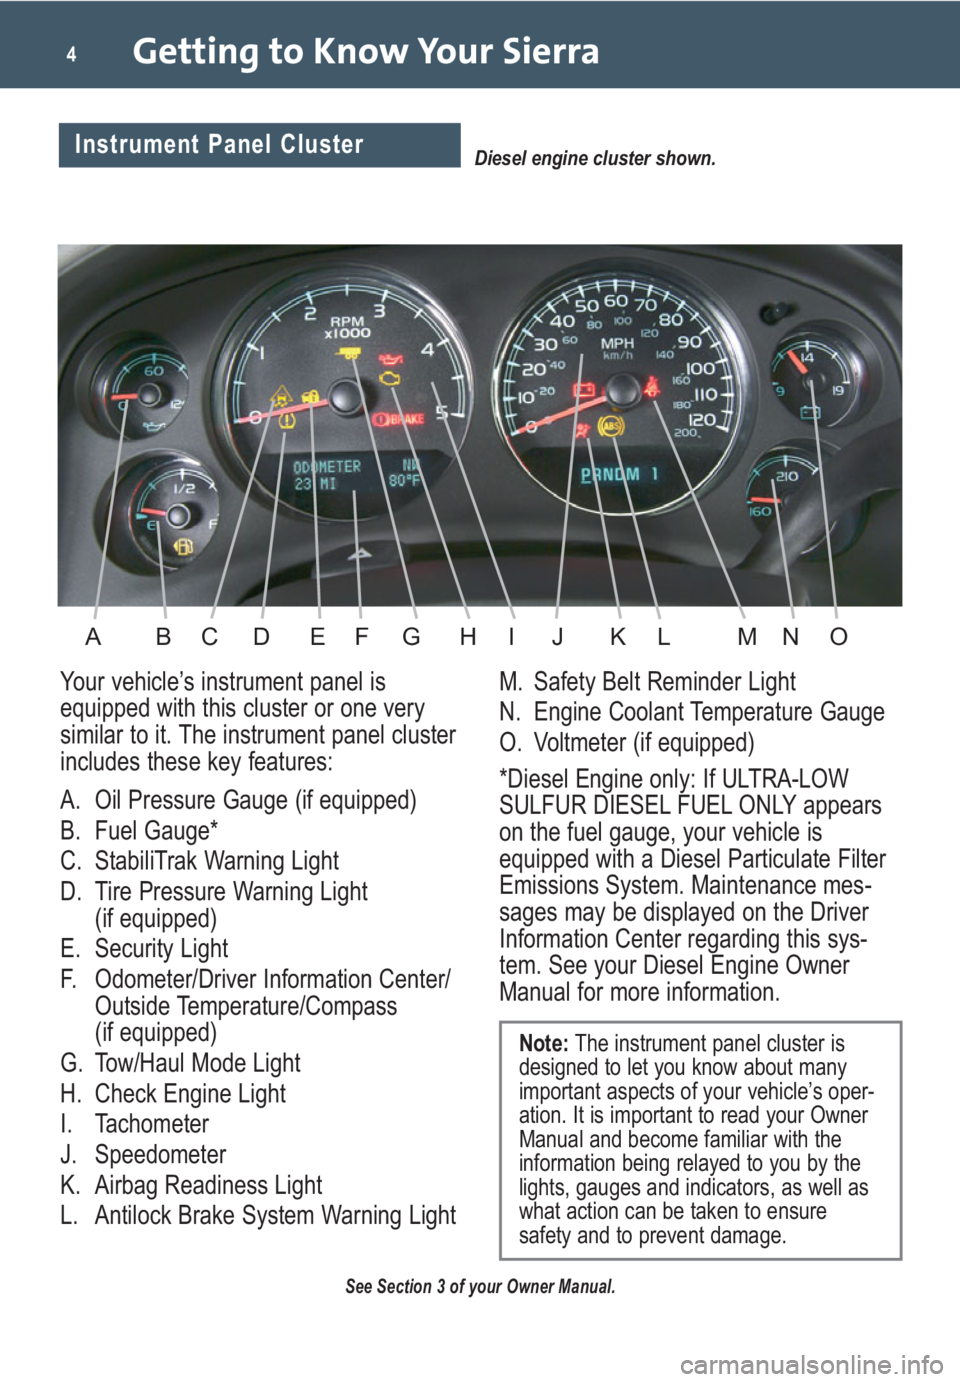 GMC SIERRA 2009  Get To Know Guide Getting to Know Your Sierra4
Your vehicle’s instrument panel is
equipped with this cluster or one very
similar to it. The instrument panel cluster
includes these key features:
A. Oil Pressure Gauge 